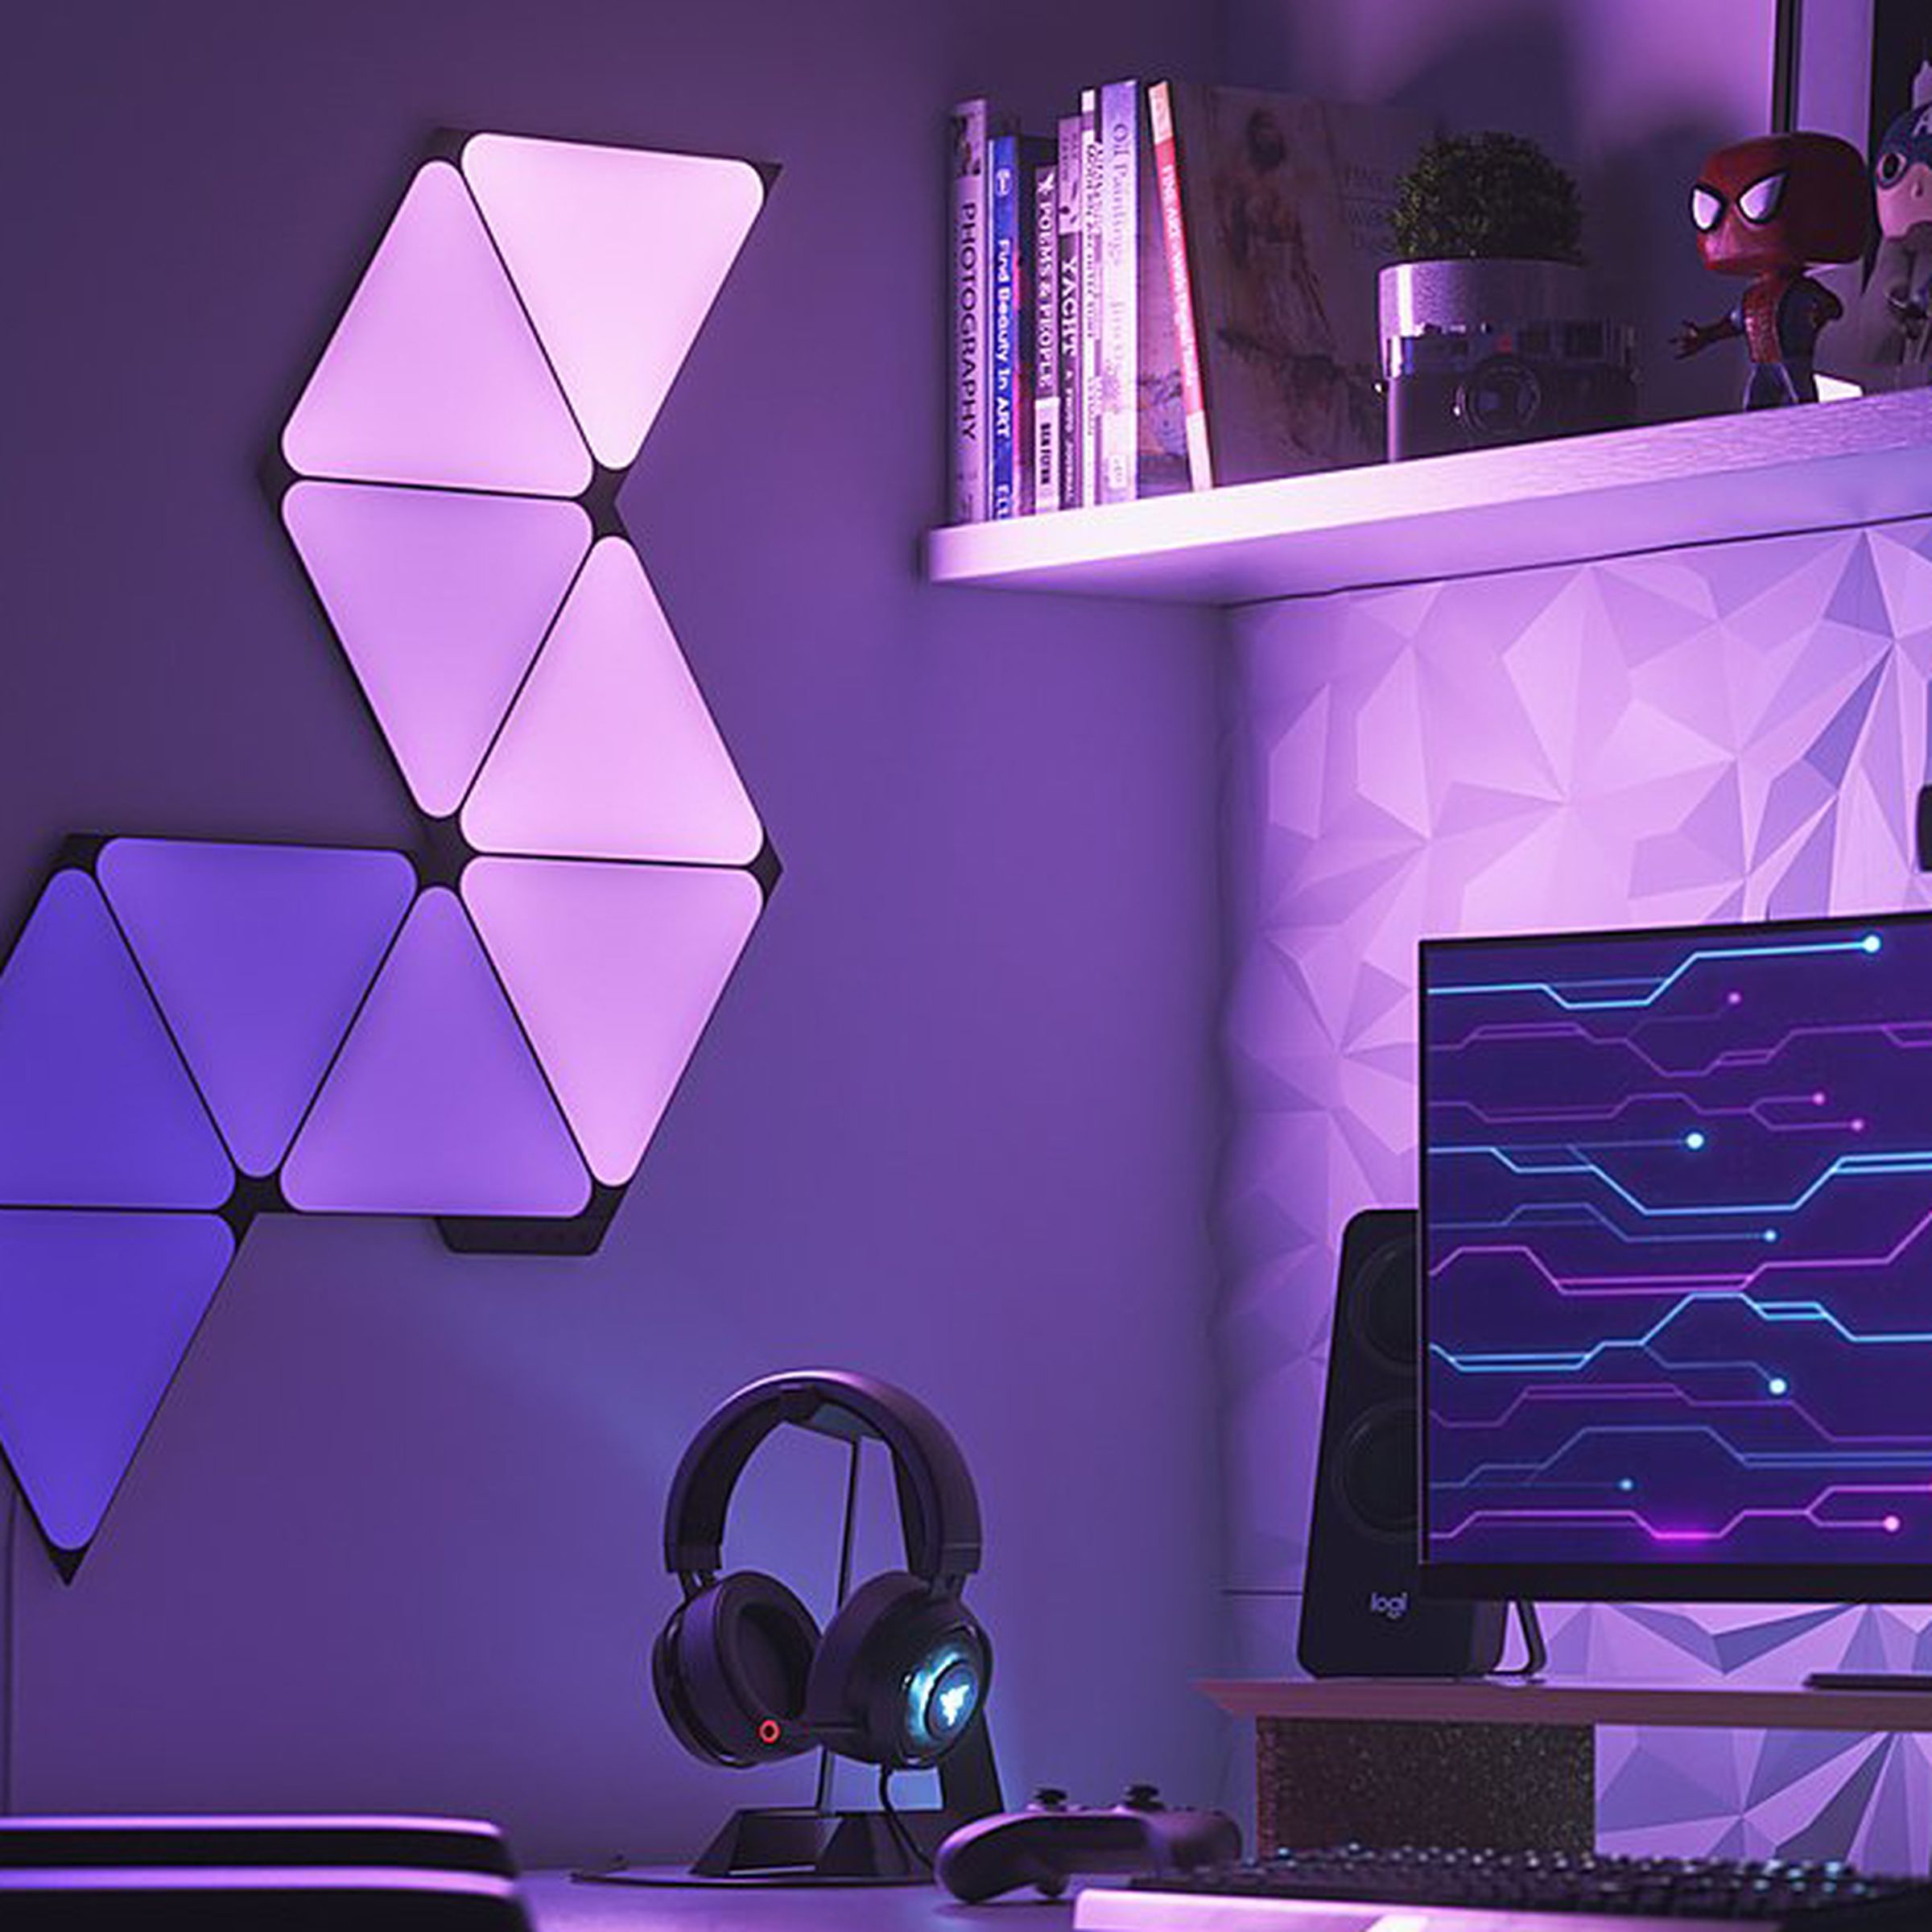 A series of glowing Nanoleaf light panels on a wall beside a pair of headphones and a computer monitor.